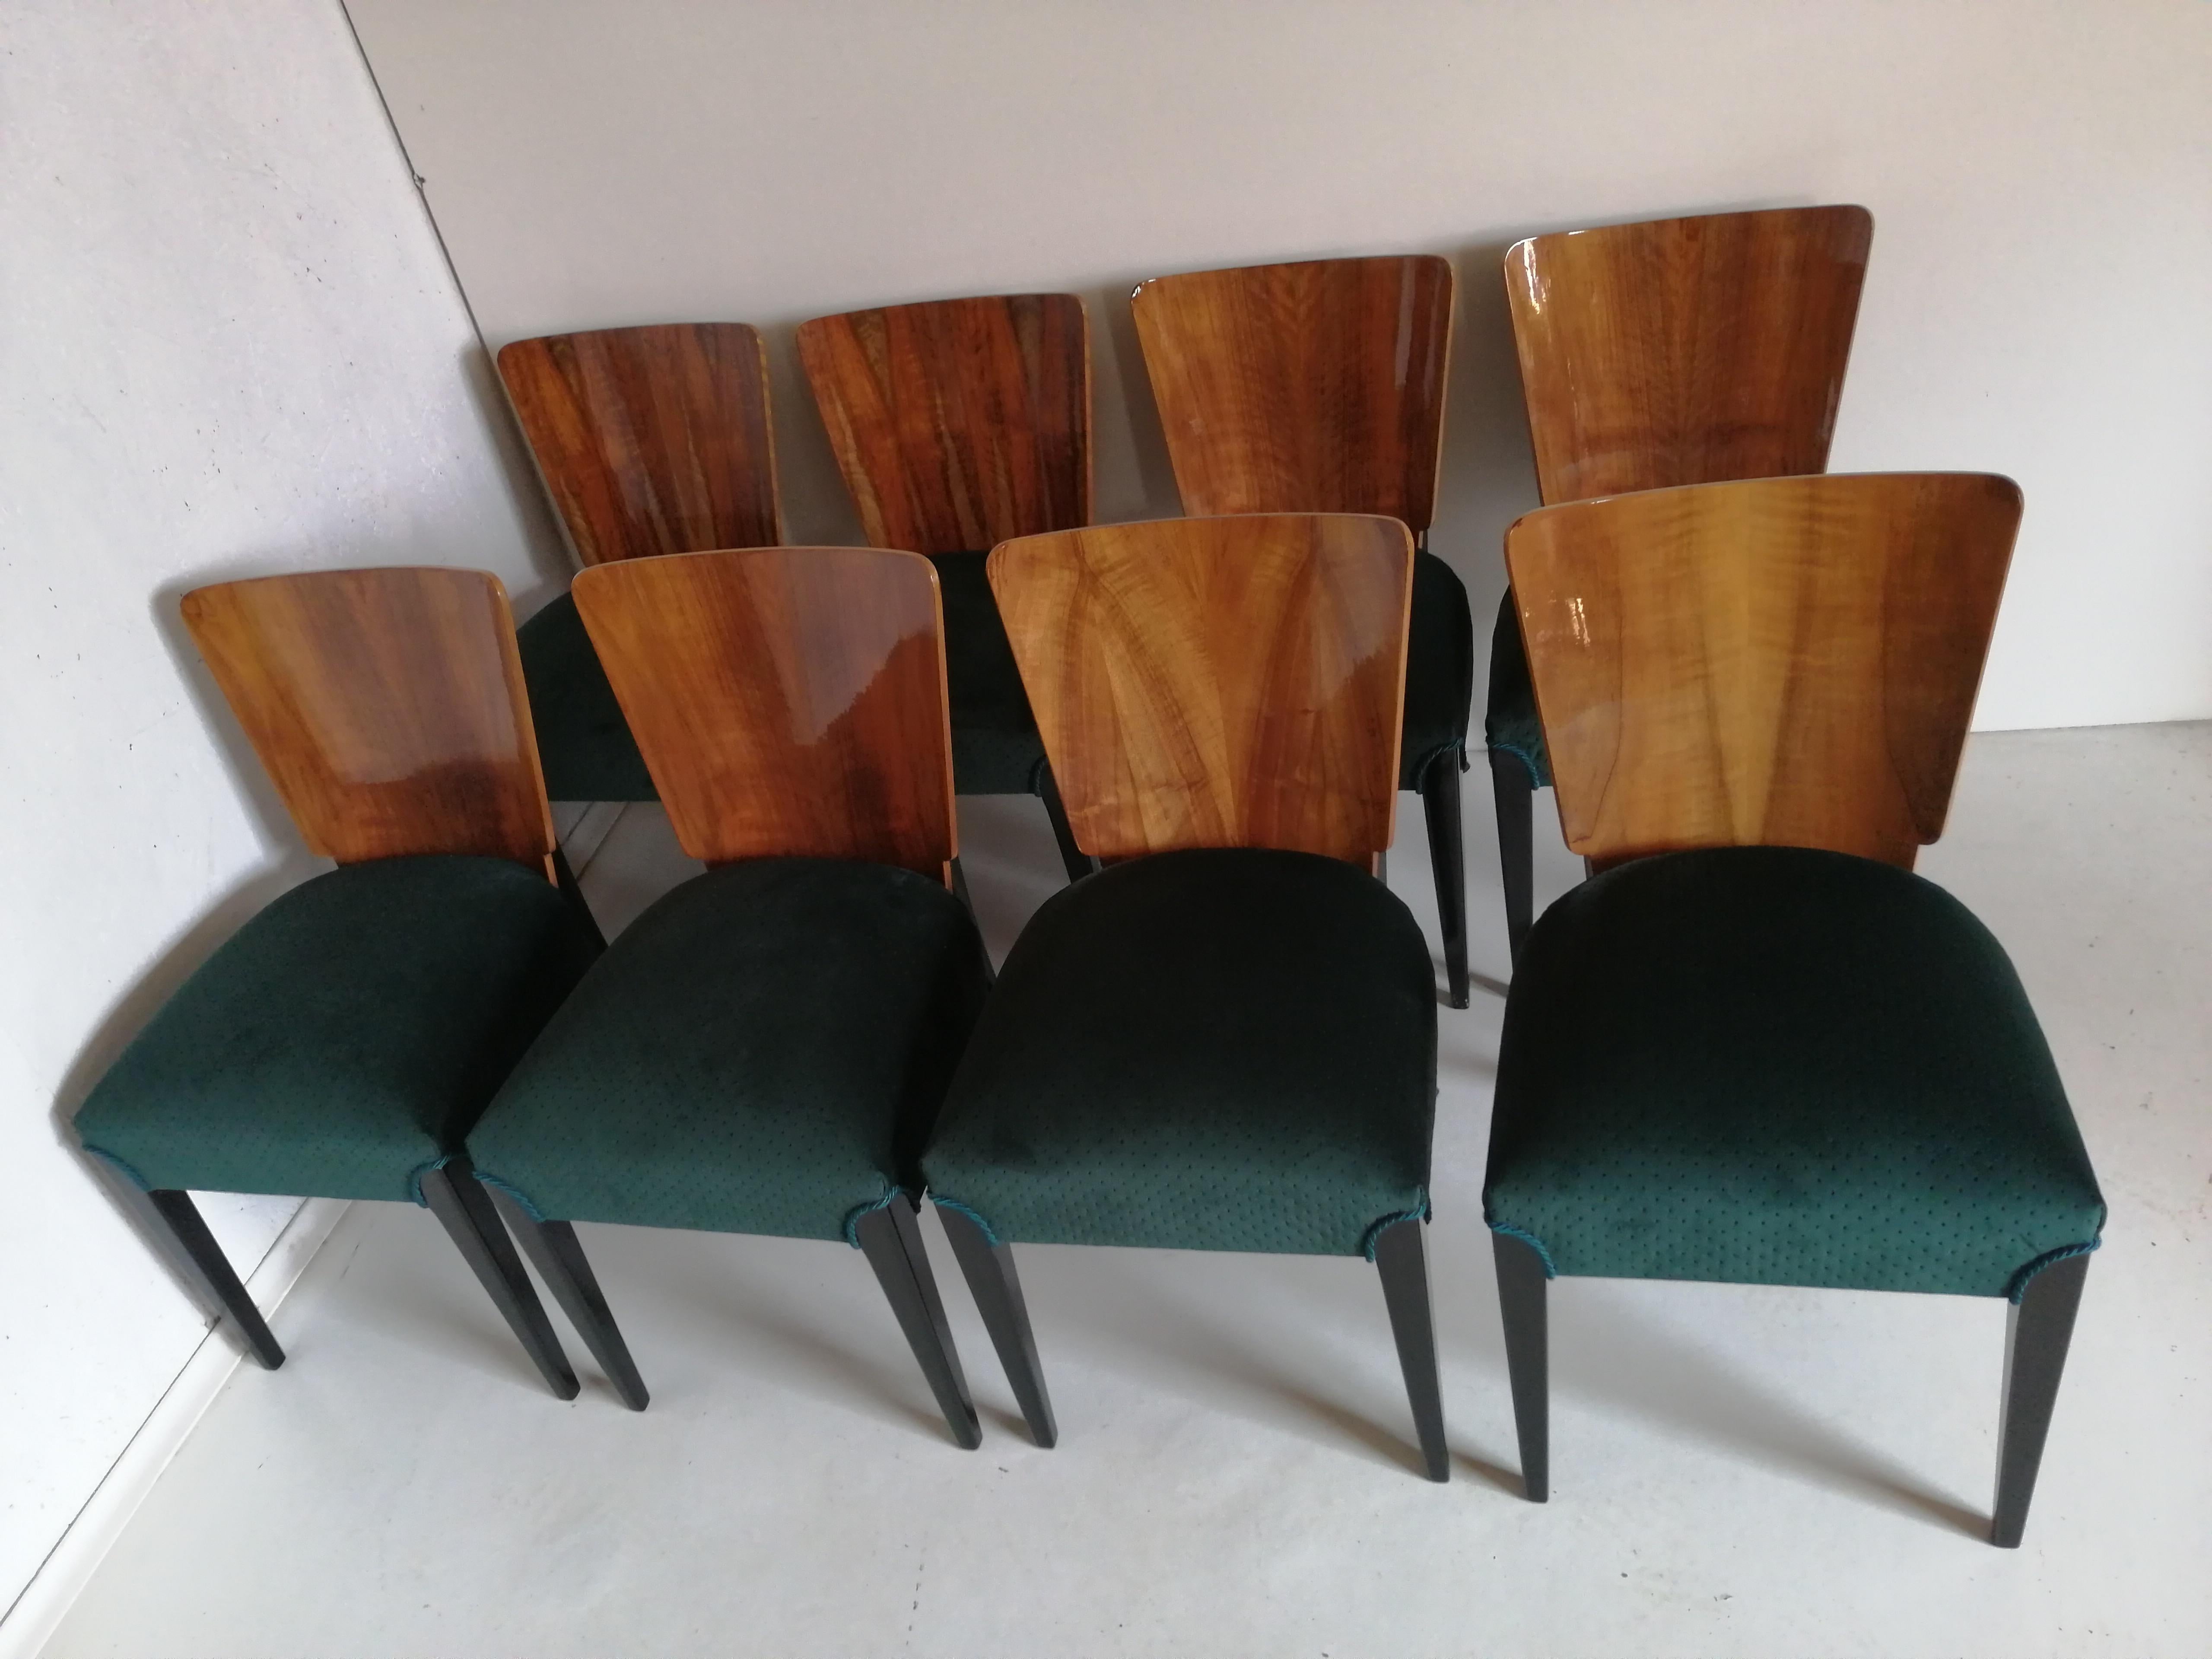 Art Deco 8 chairs by J. Halabala from 1940 we present the chairs by J. Halabala from 1940s a Czech designer ranked among the most outstanding creators of the modern period. The peak of his career fell on the 1930s and 1940s when he worked for a